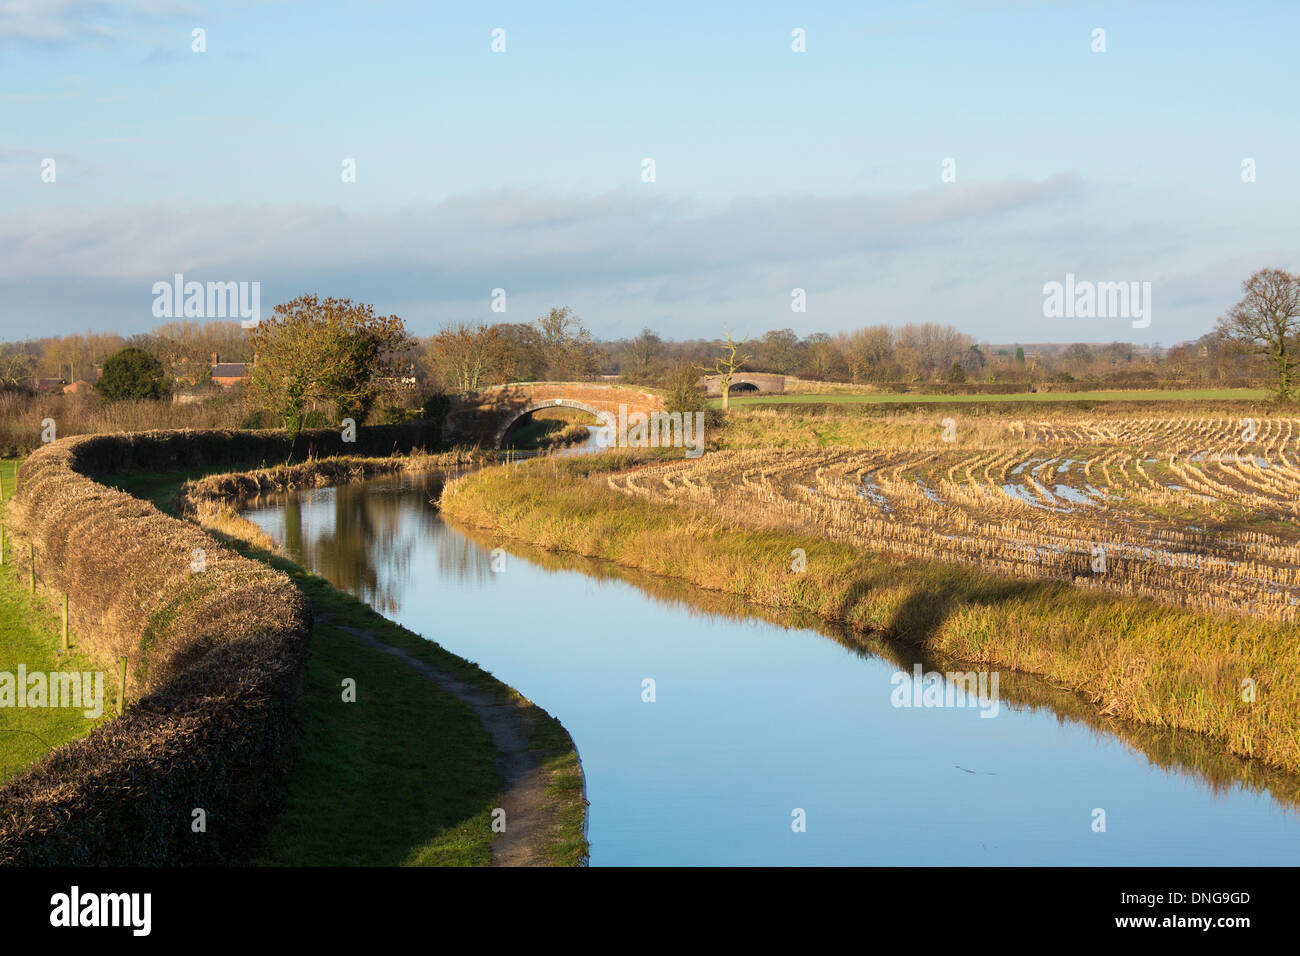 The winding Ashby de la Zouch canal in Congerstone, Leicestershire. Stock Photo